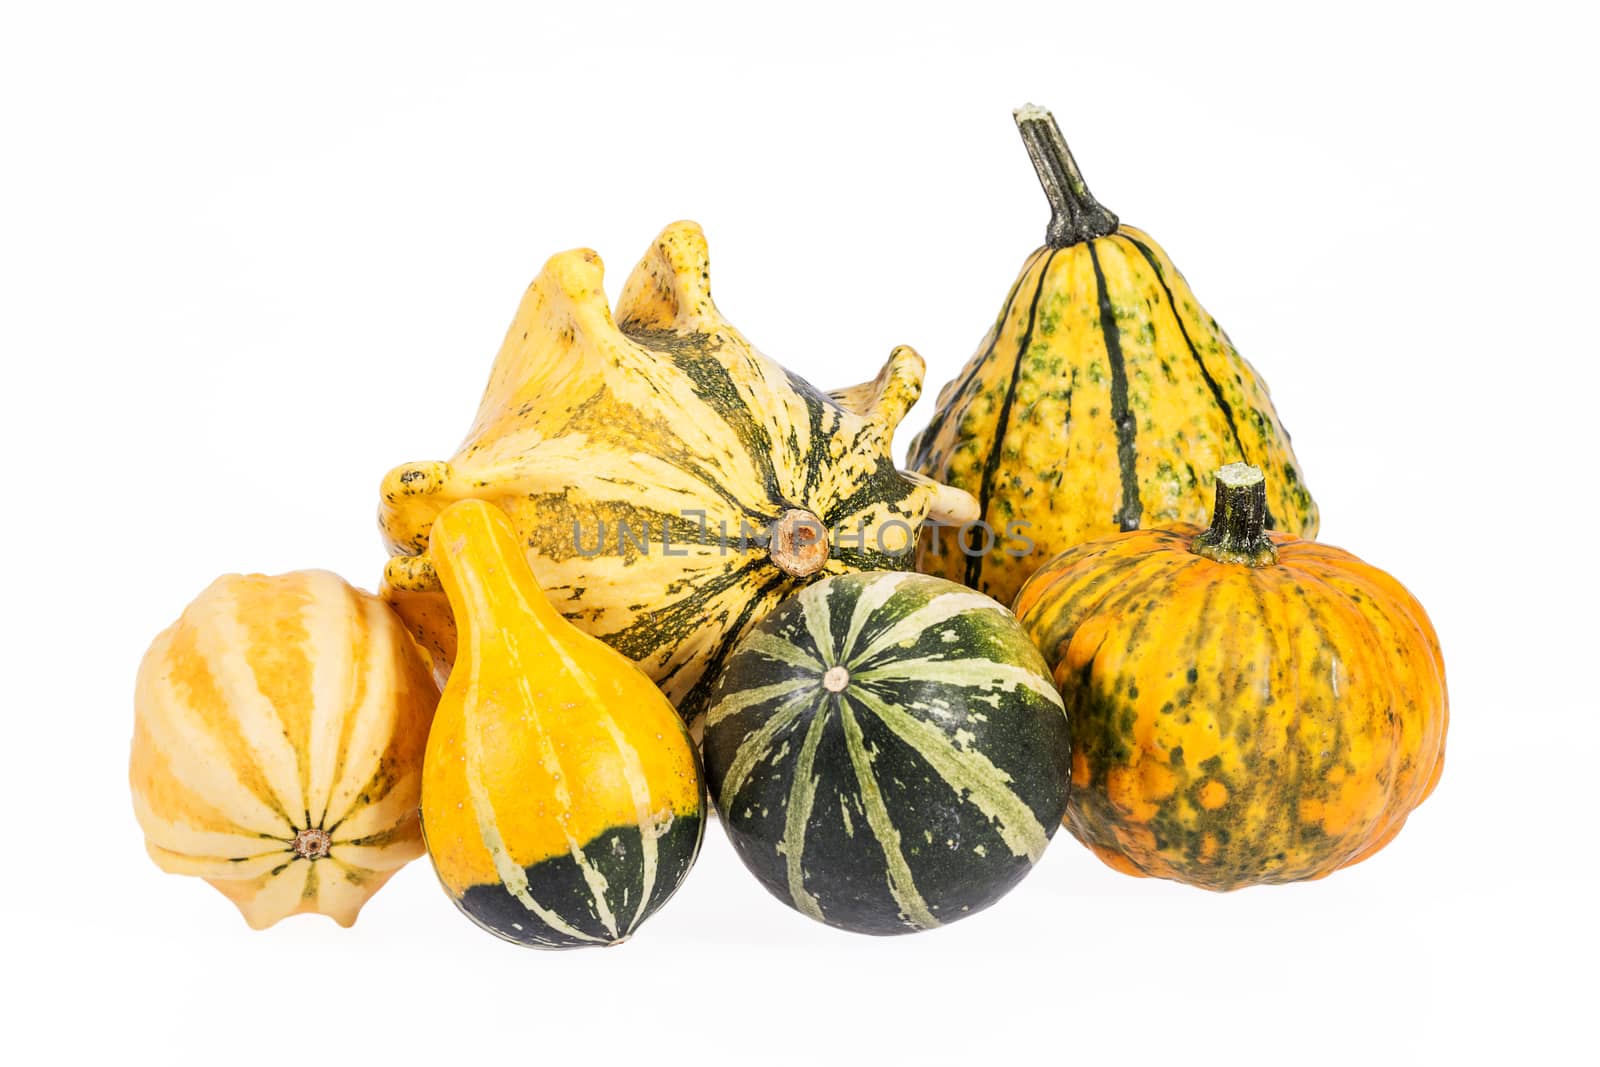 Vegetables of pumpkin decorative isolated on white background by mychadre77